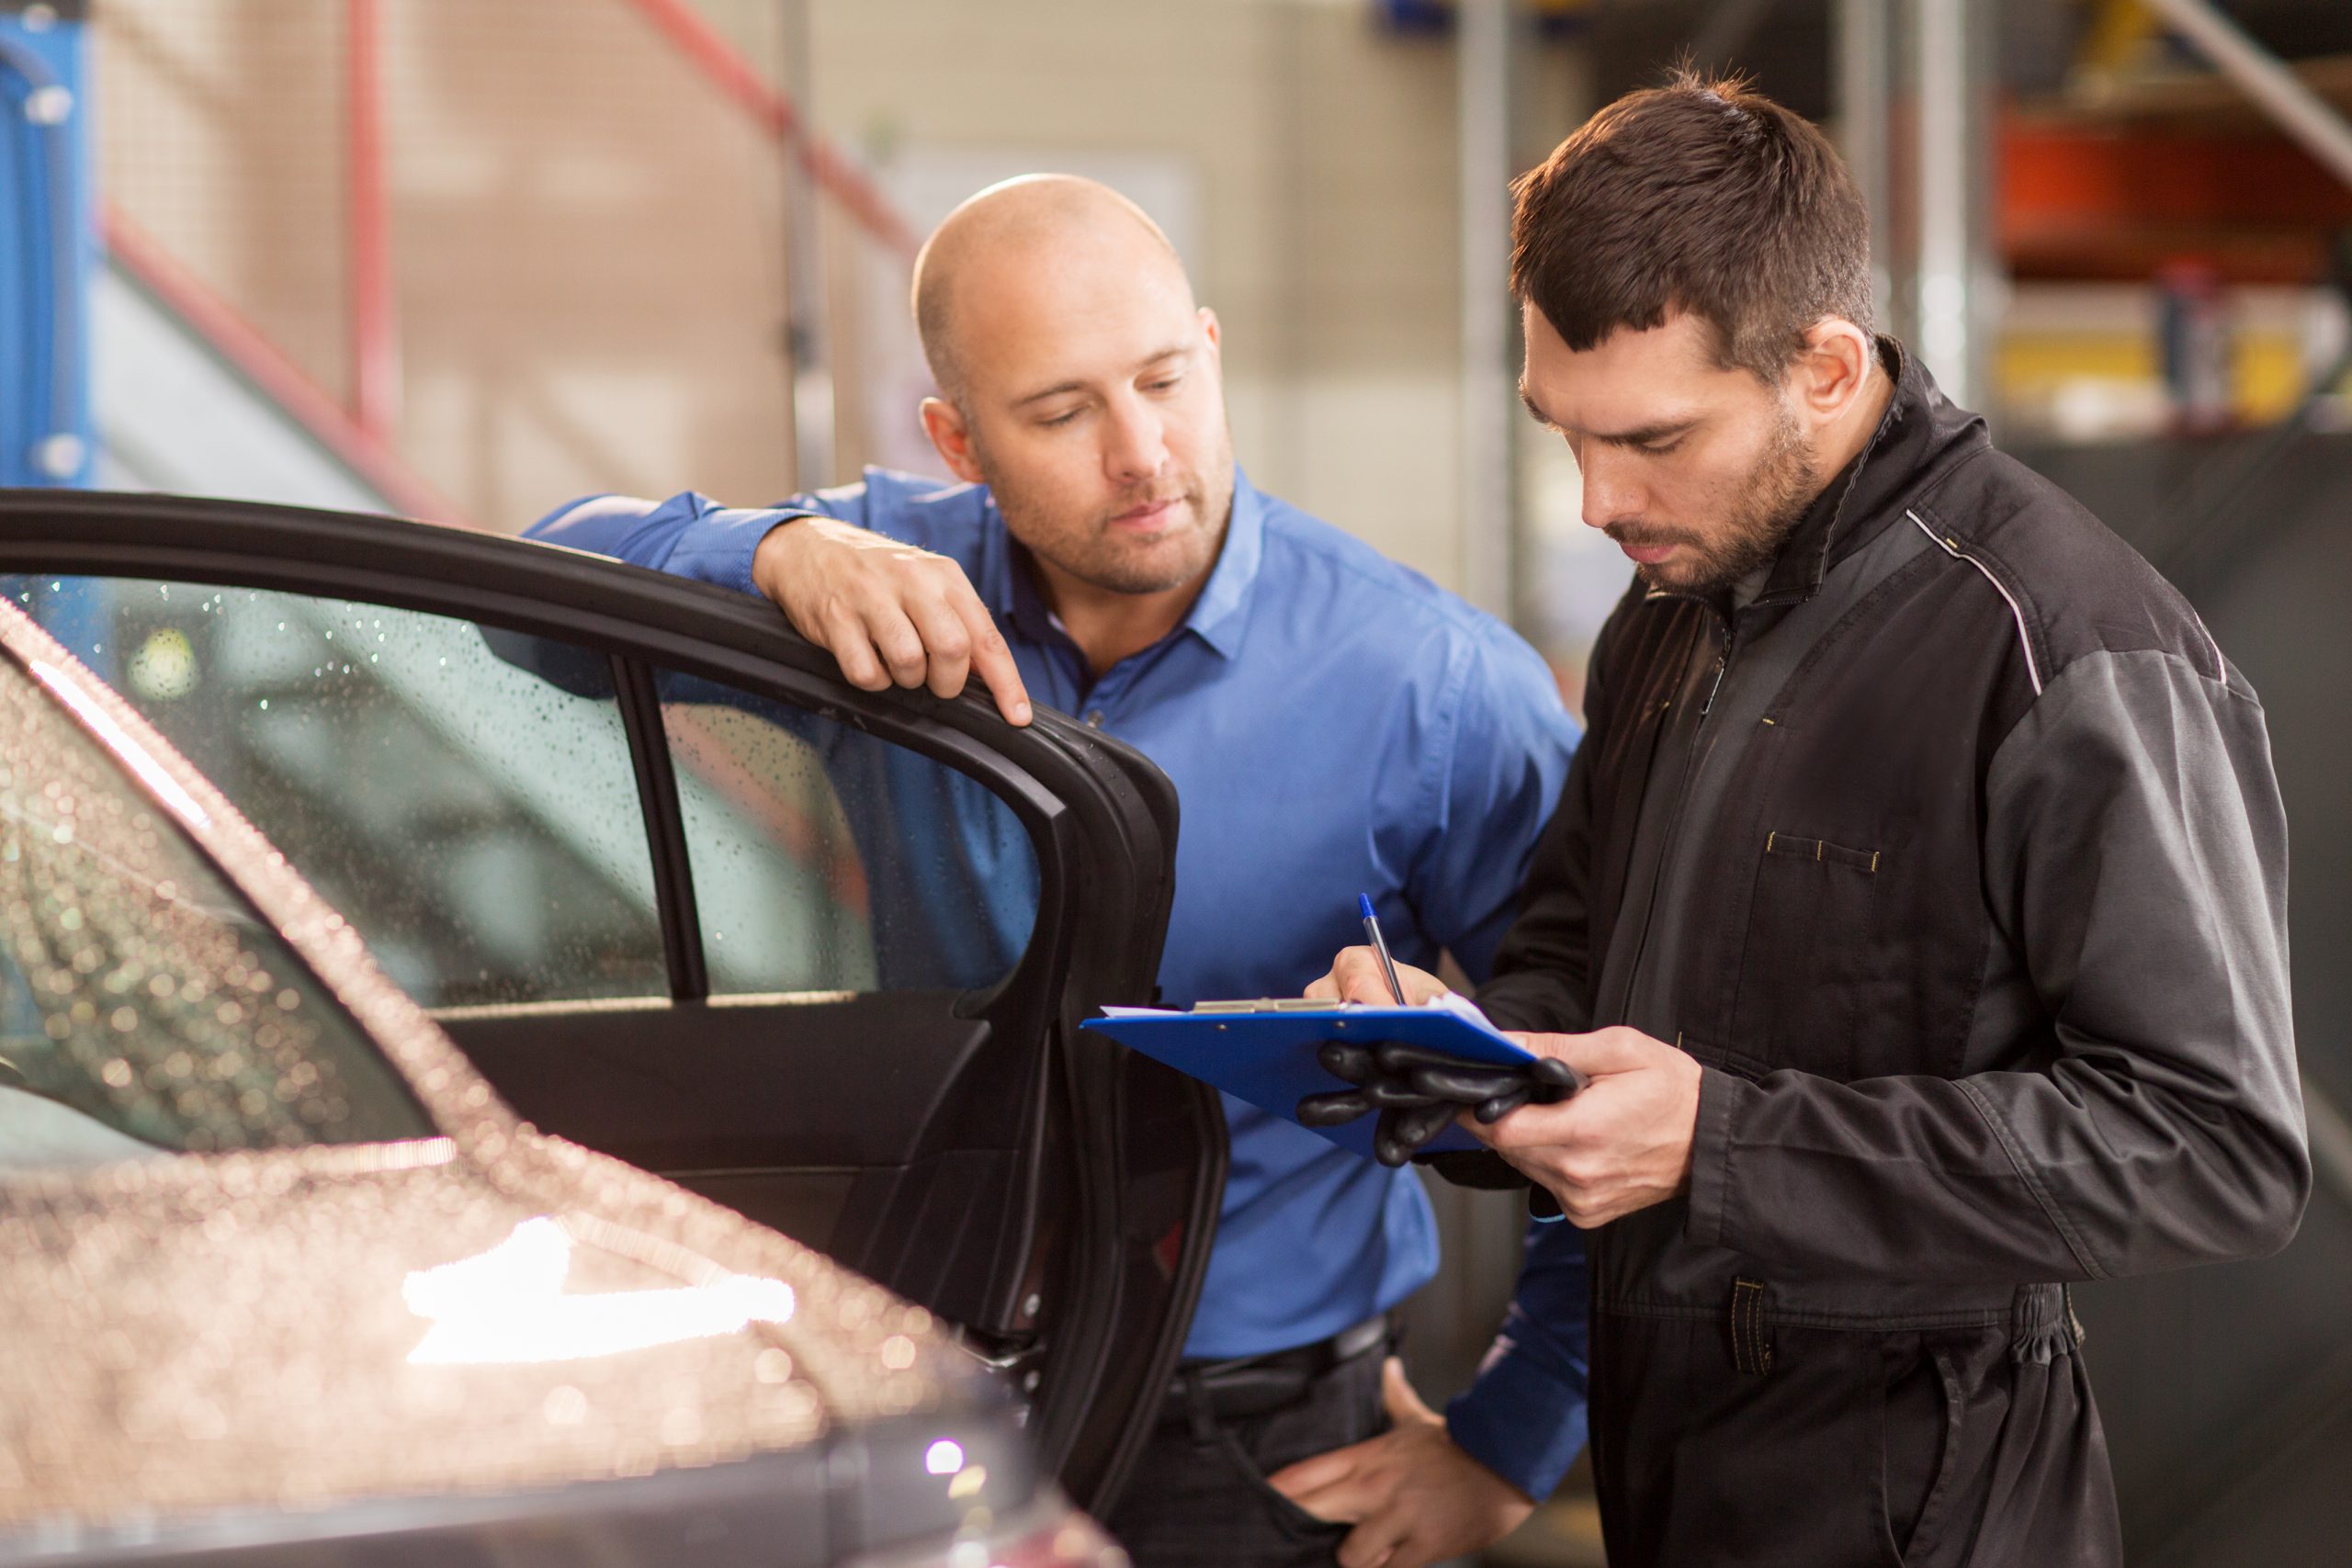 Whether you’re taking a car in for a first repair or yet another attempt, it’s important to advocate for yourself and get the information you need. Here’s what to do when it’s time to take your car to the shop. 